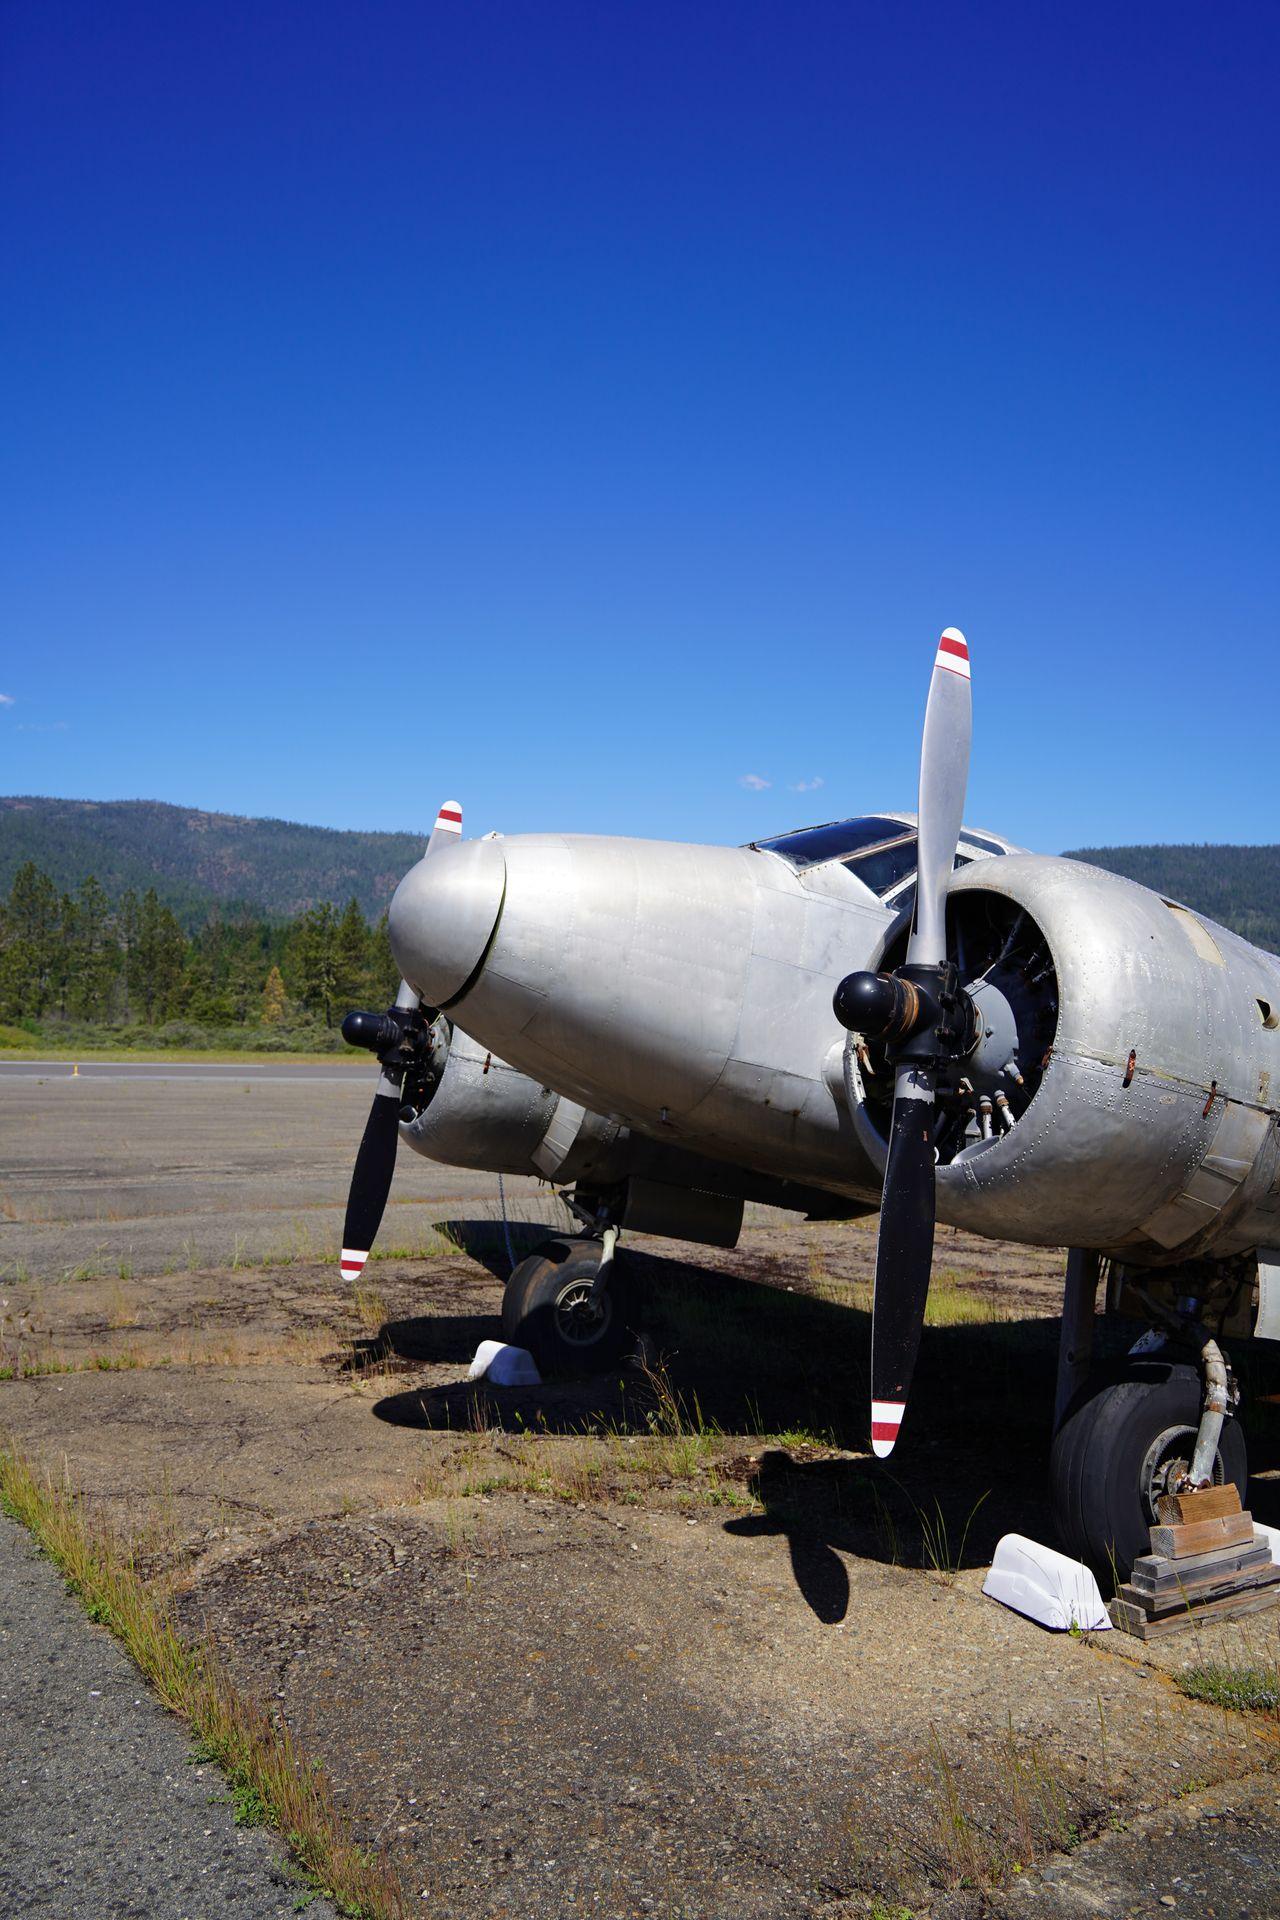 A plane that formerally used for smokejumping at the Siskiyou Smokejumper Museu